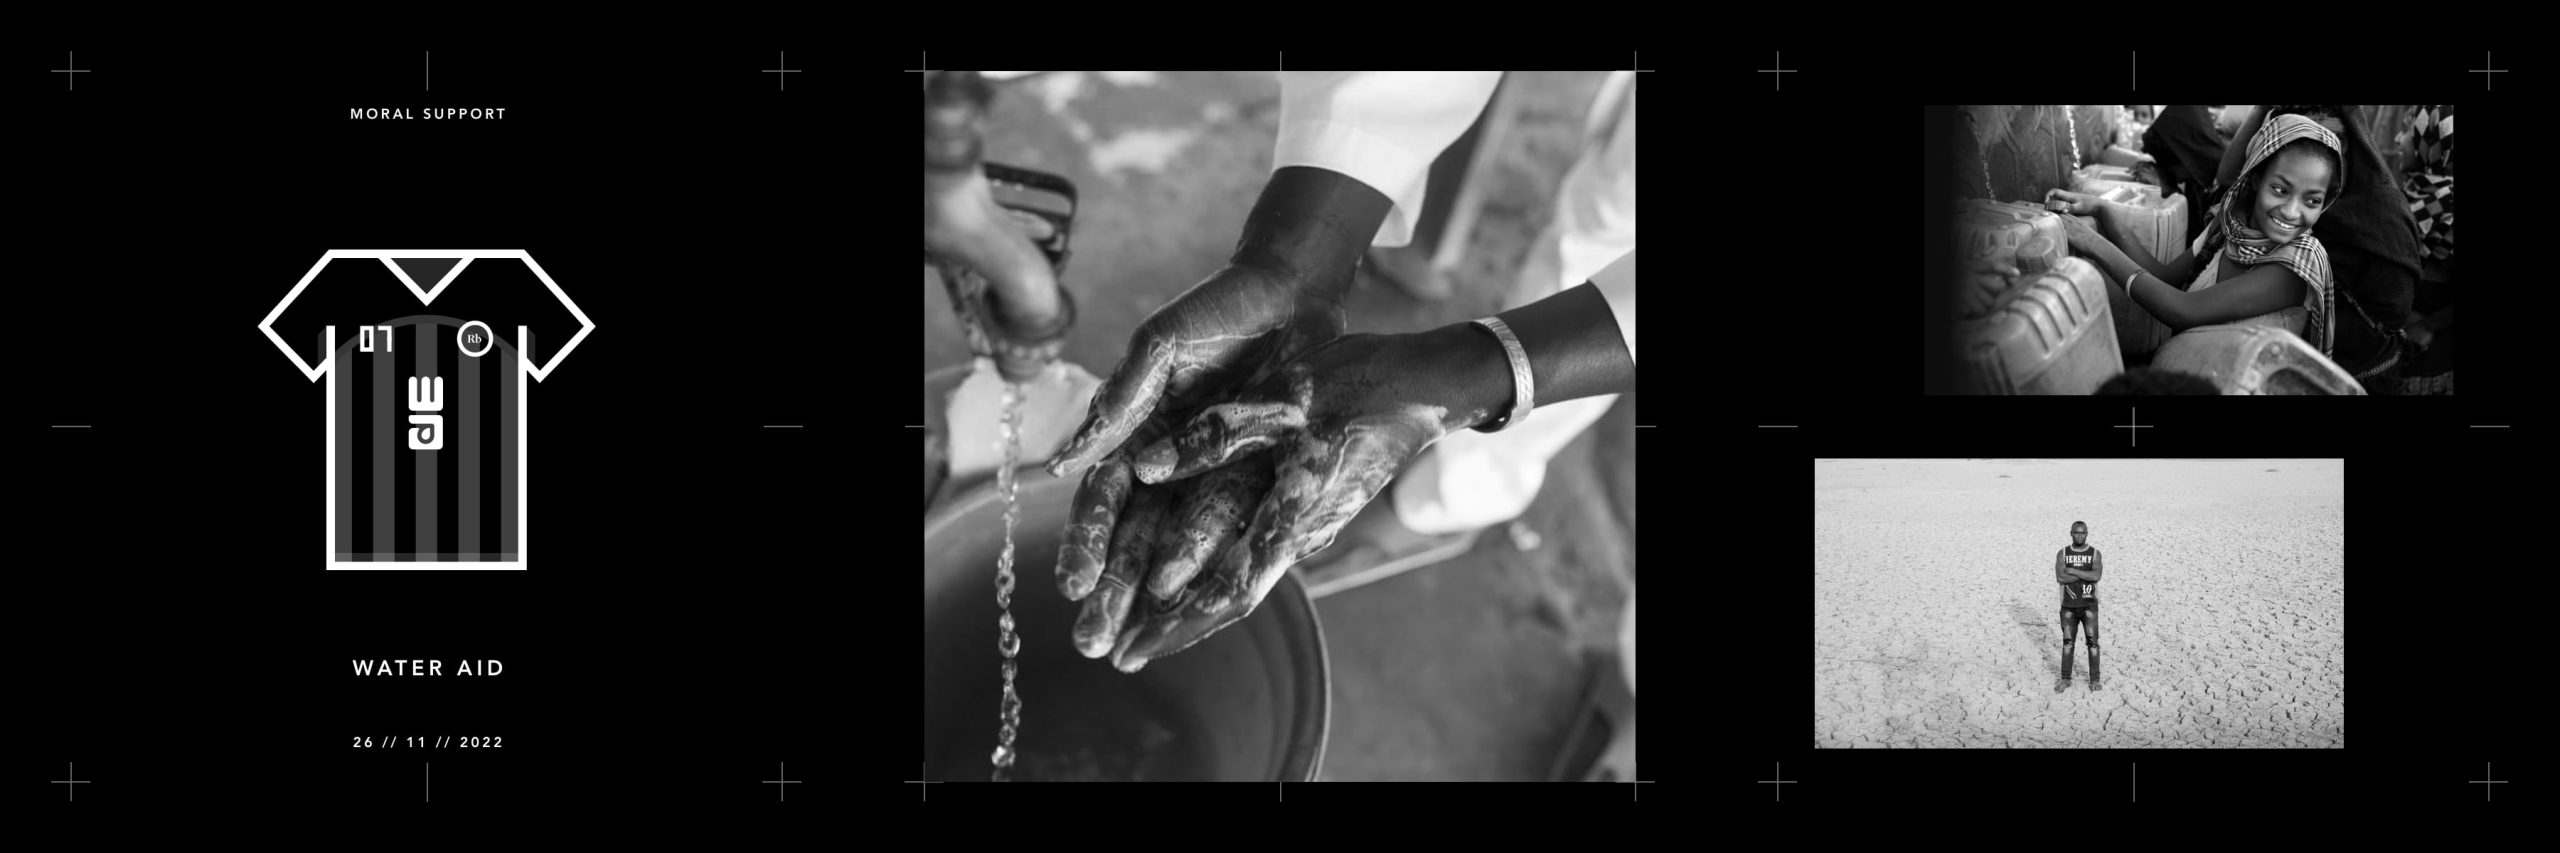 Moral Support – Water Aid